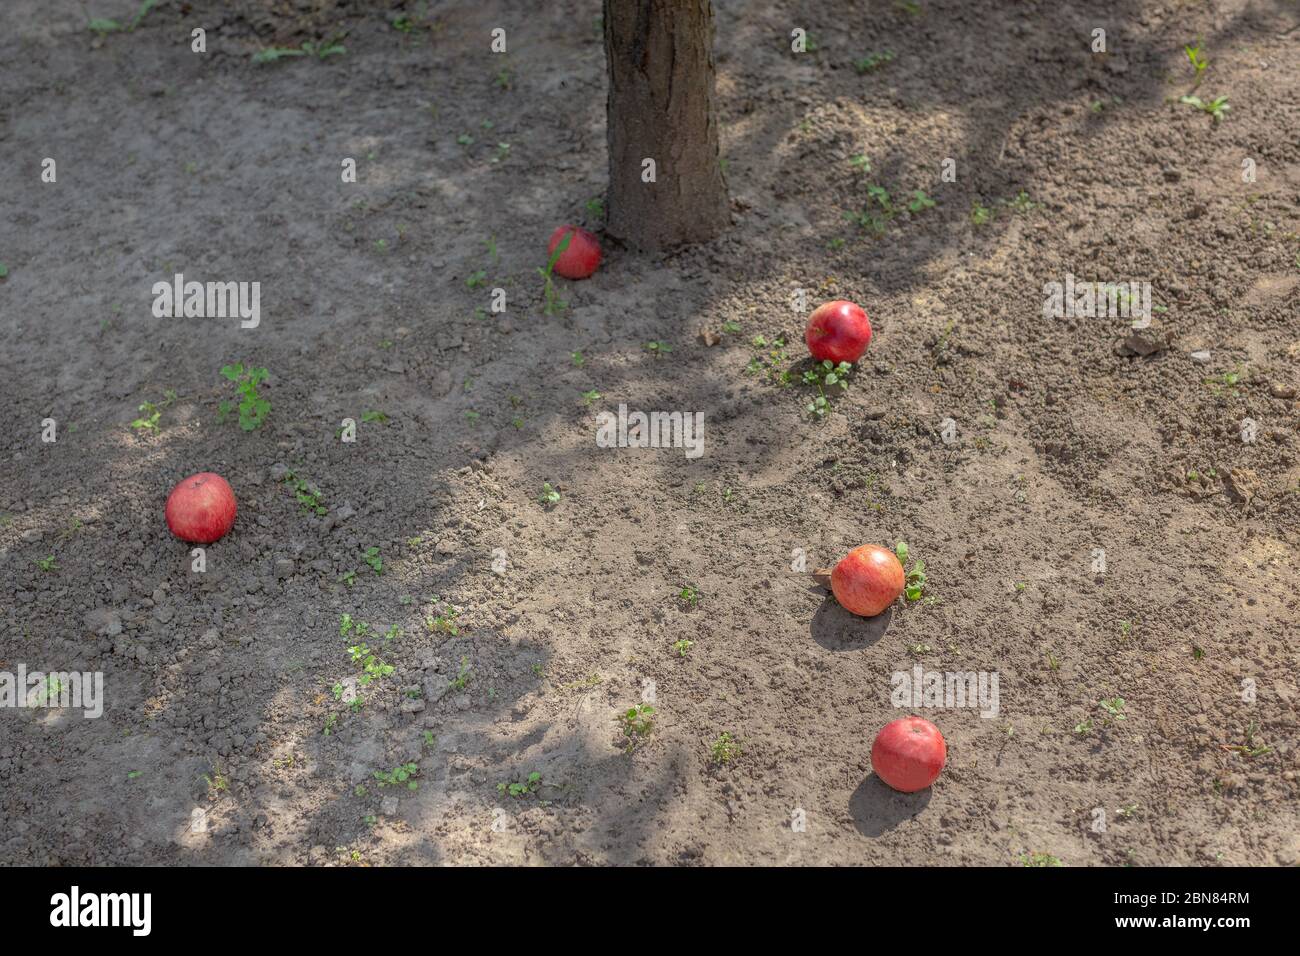 Five ripe apples lie on the ground under tree. Apples fallen down. Summer background Stock Photo